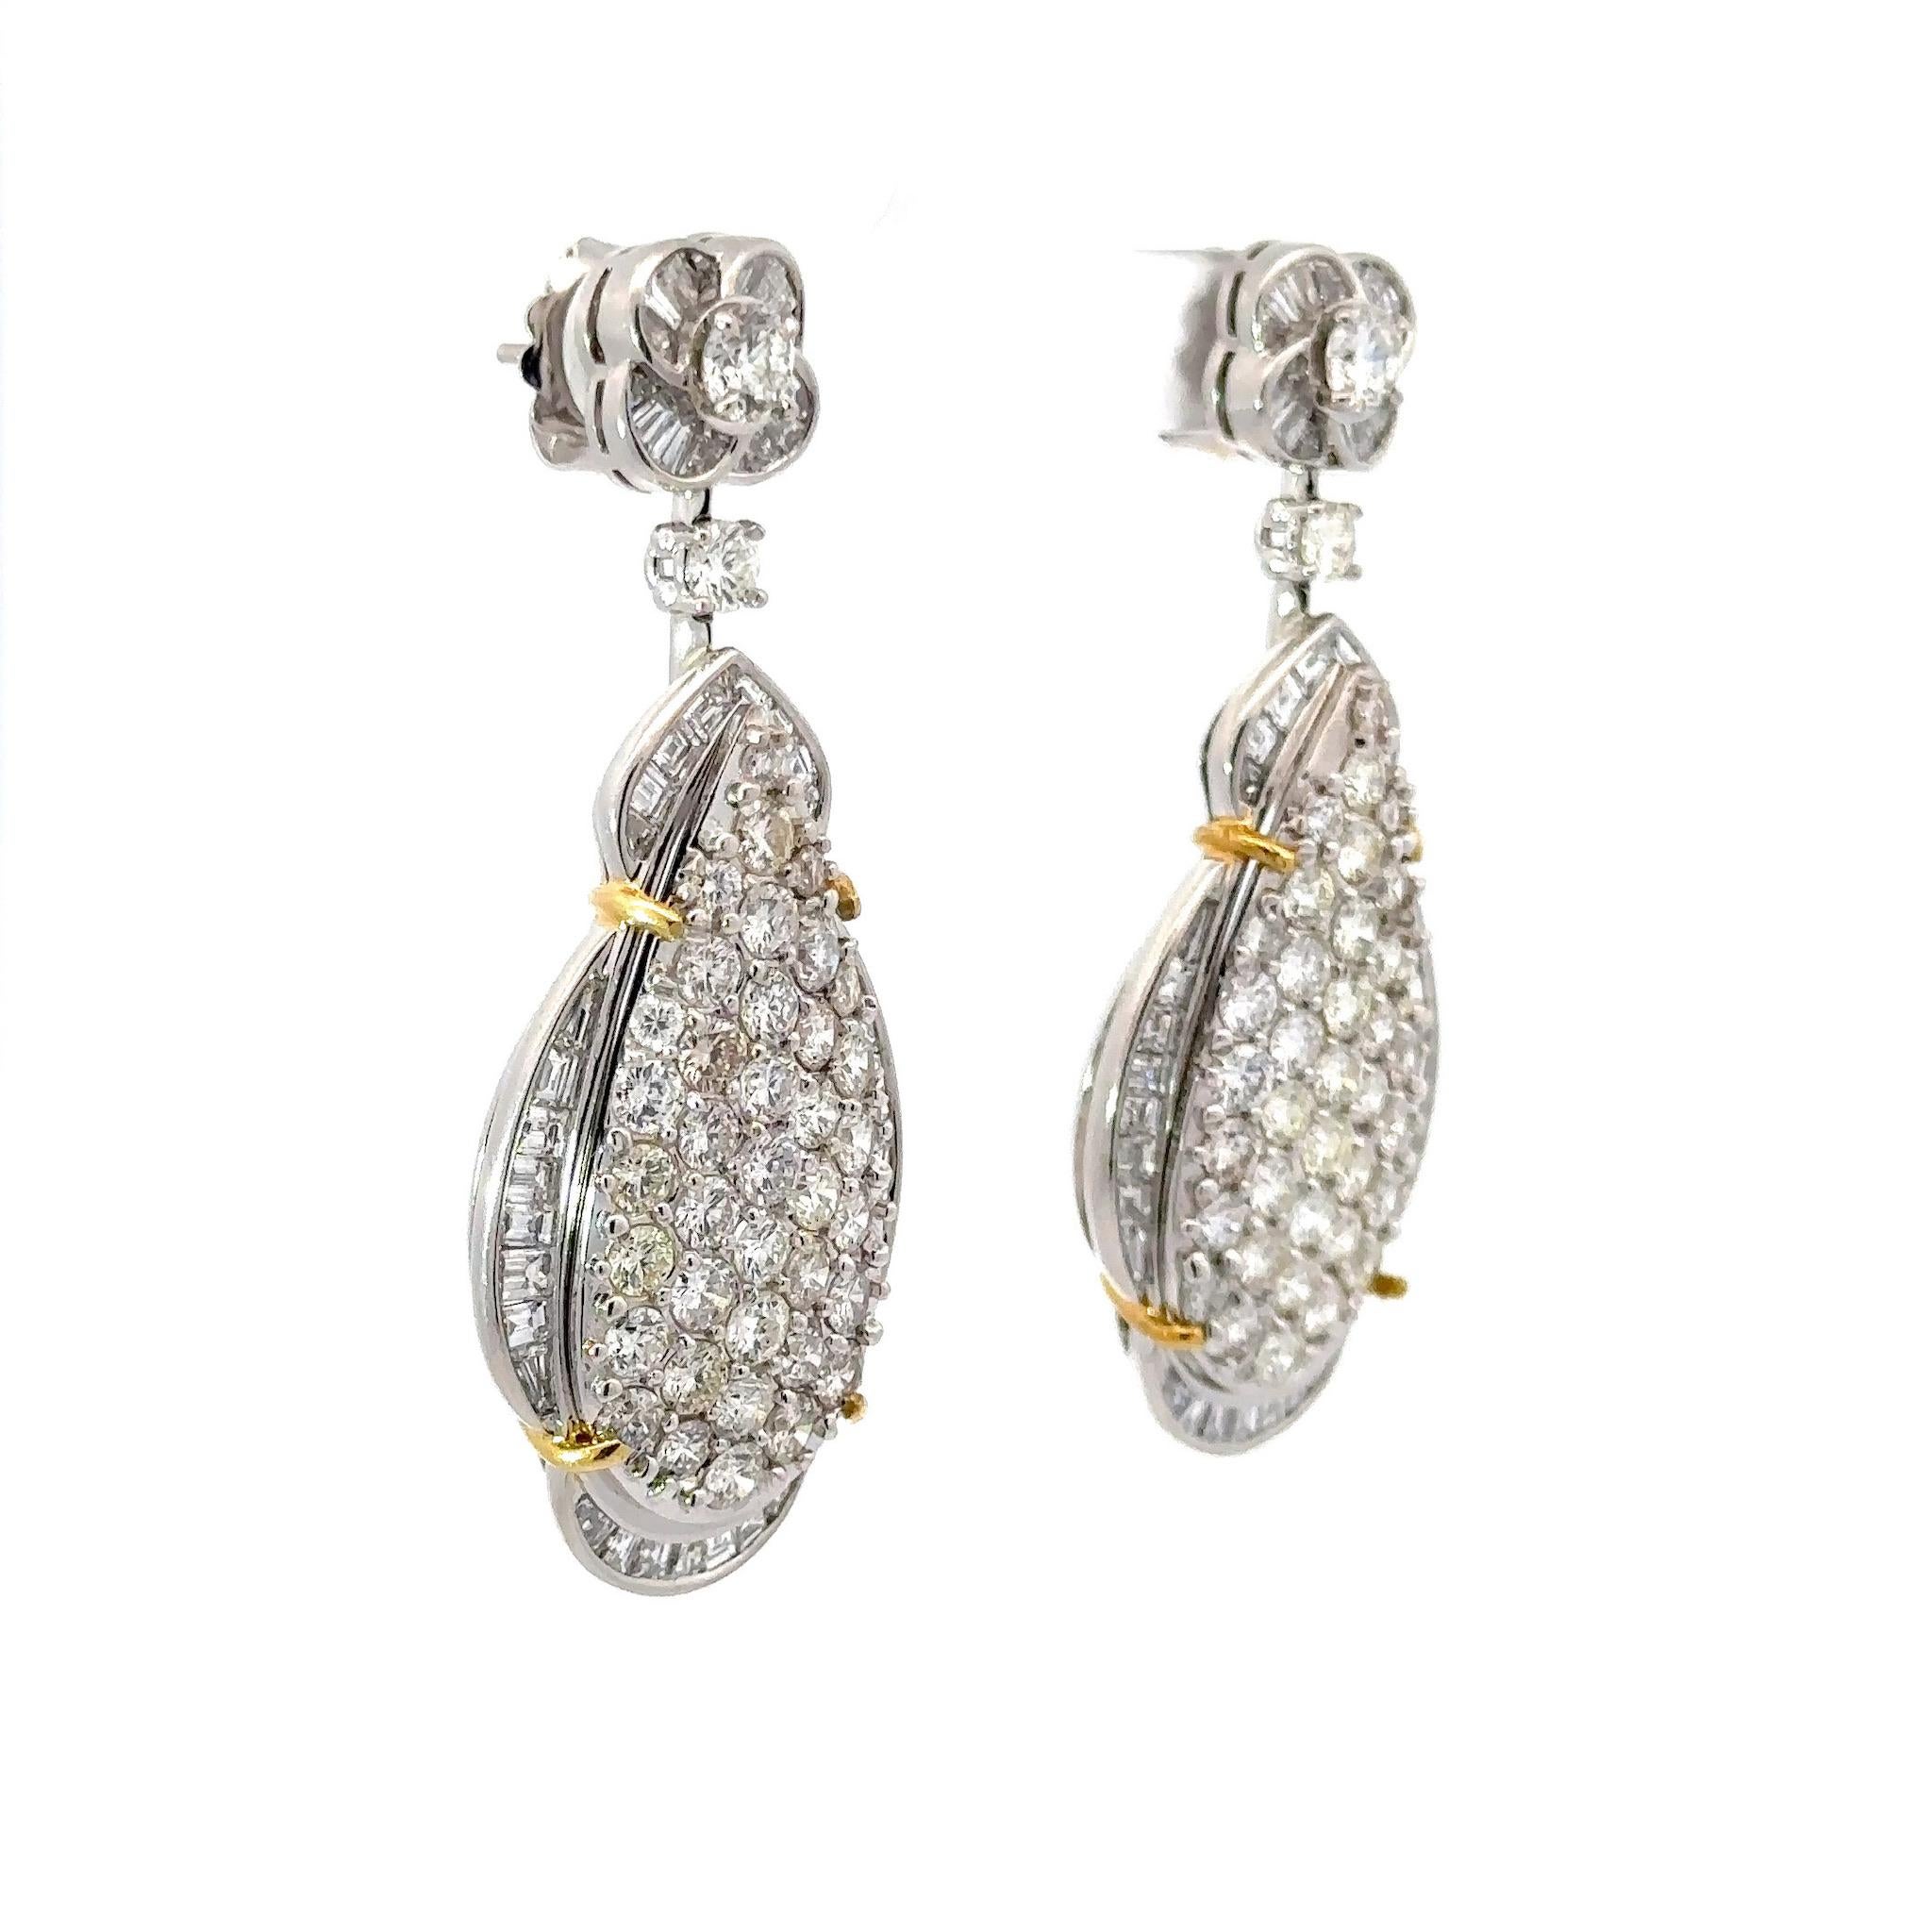 This magnificent pair of 18K White gold and Diamond drop earrings with 18K Yellow gold accents is more than a picturesque luxury piece, behold this true vision of excellence and craftsmanship. The perfect pair of Diamond Pear shape Drop earrings